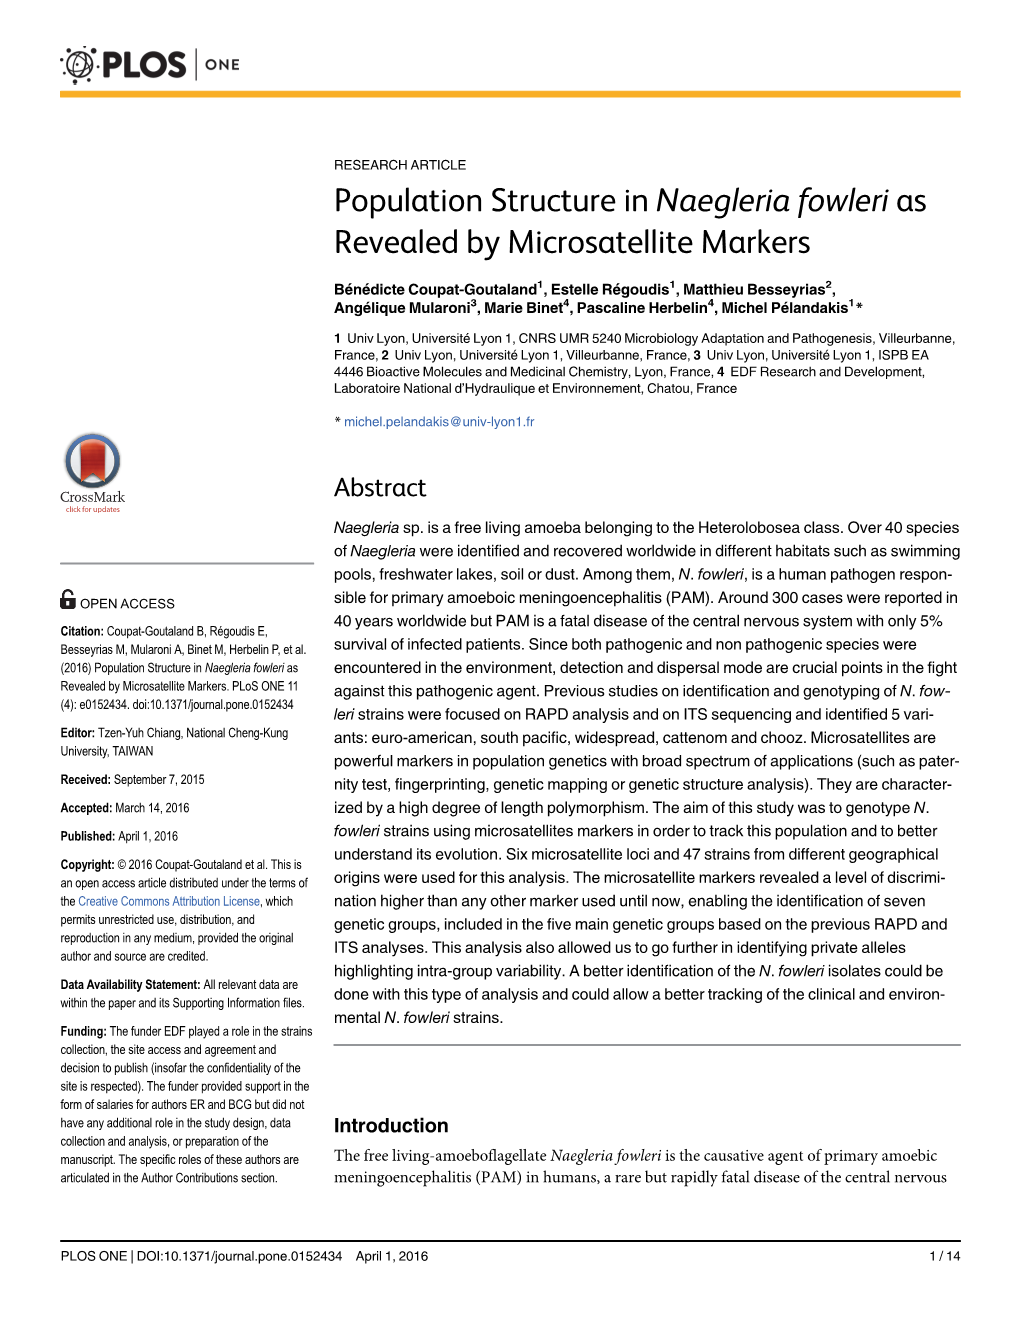 Population Structure in Naegleria Fowleri As Revealed by Microsatellite Markers